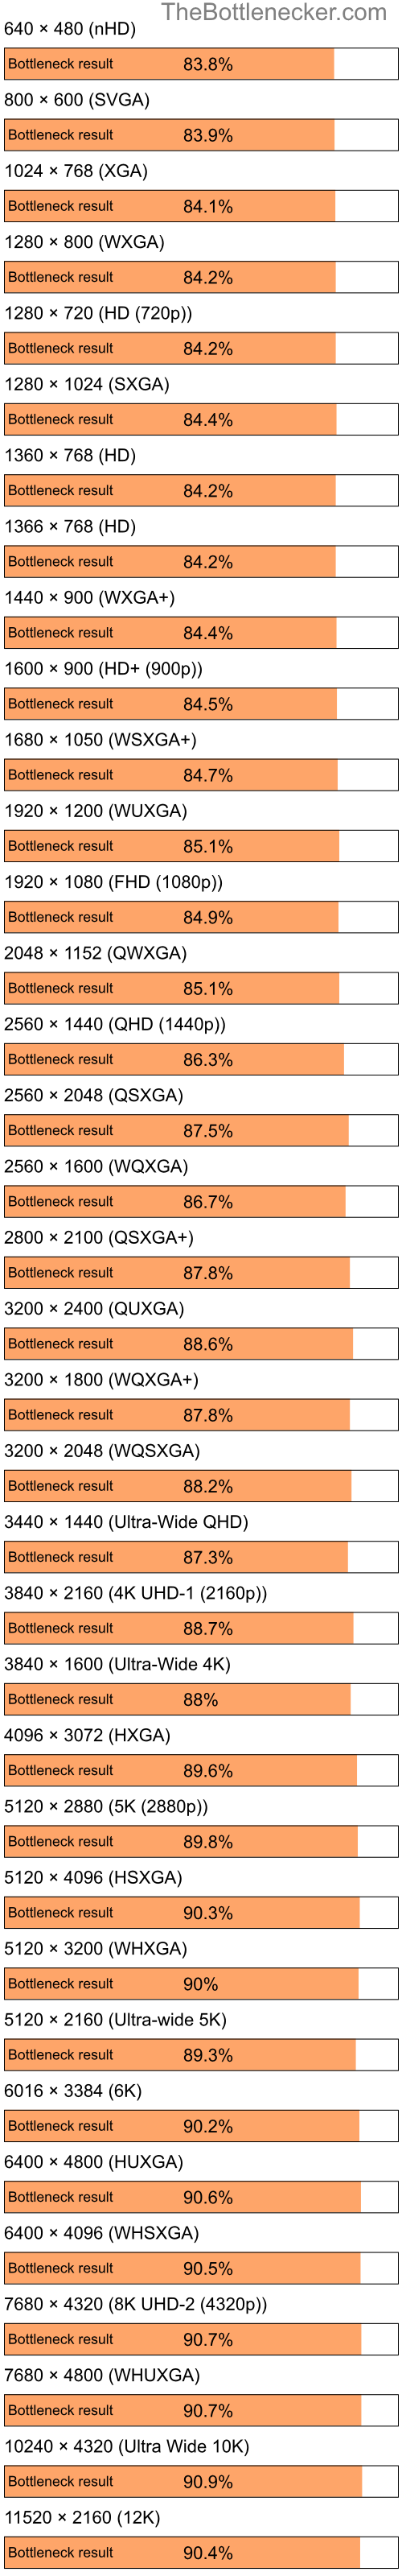 Bottleneck results by resolution for Intel Pentium 4 and NVIDIA GeForce FX 5600XT in Processor Intense Tasks